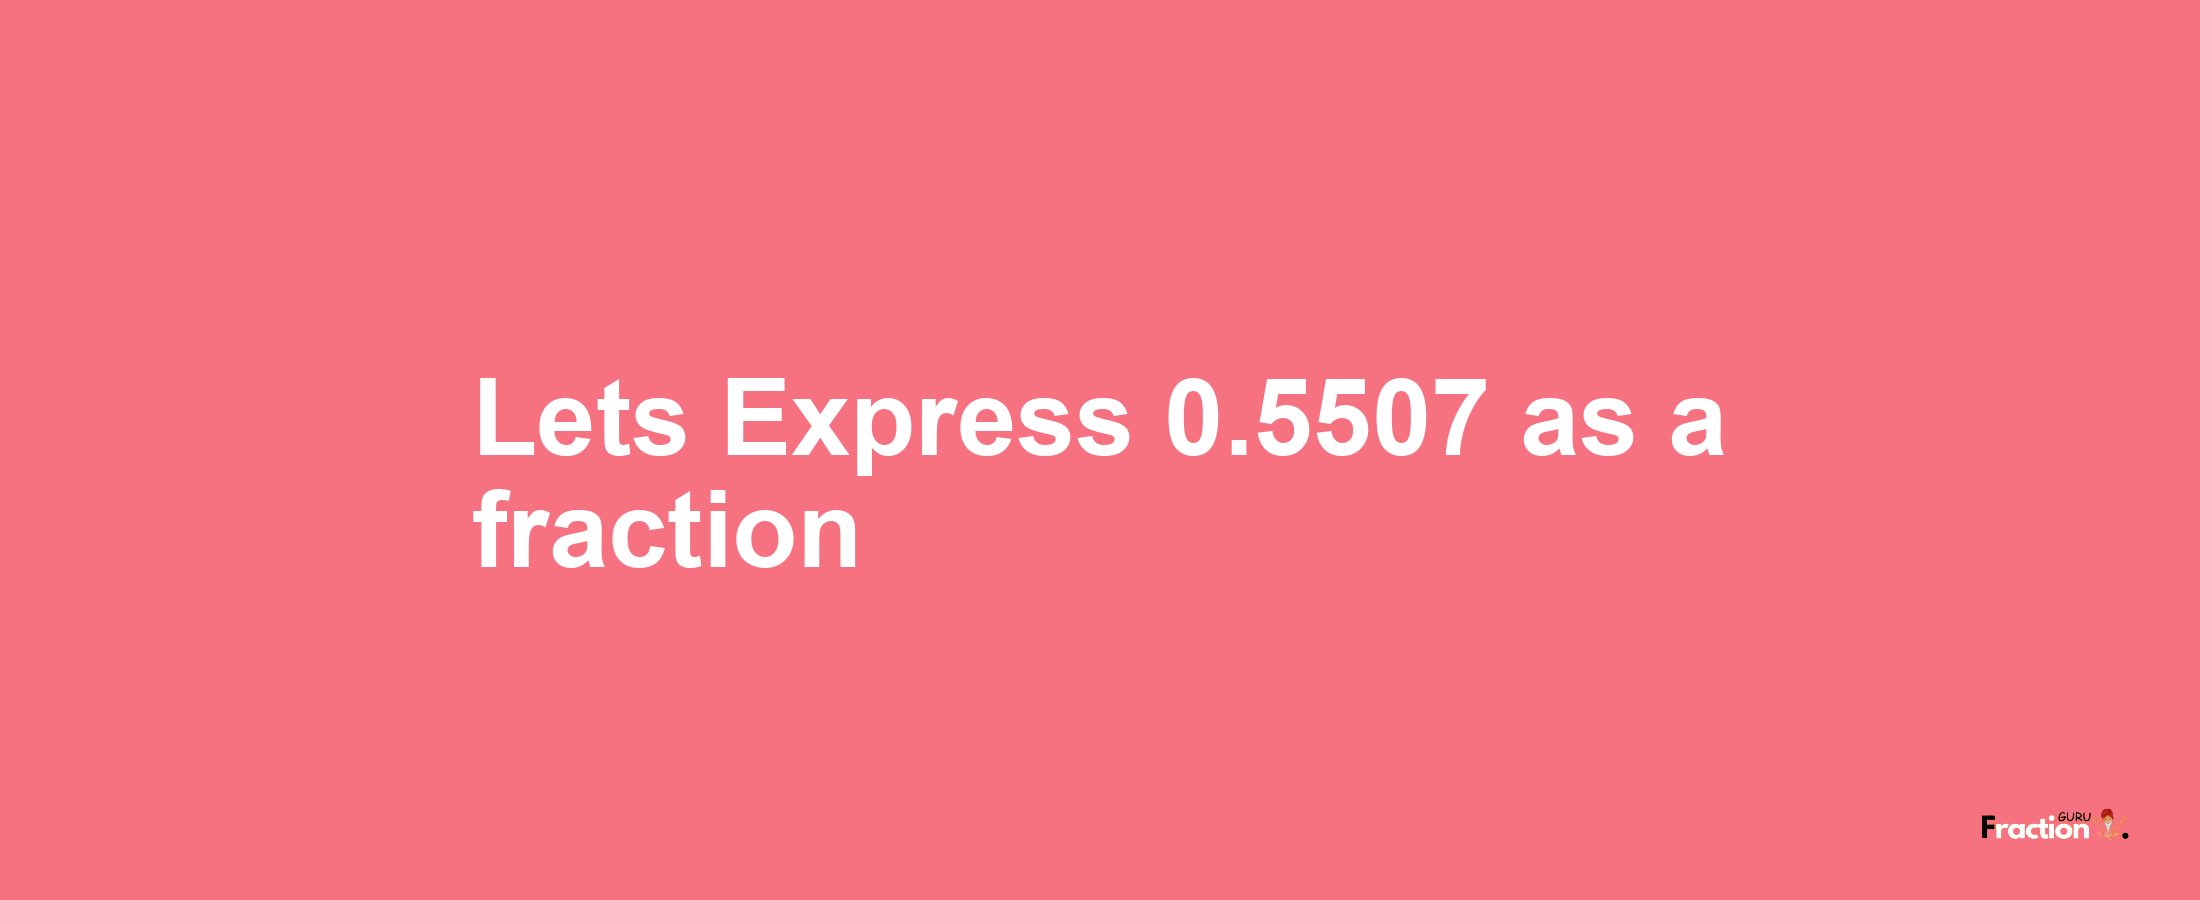 Lets Express 0.5507 as afraction